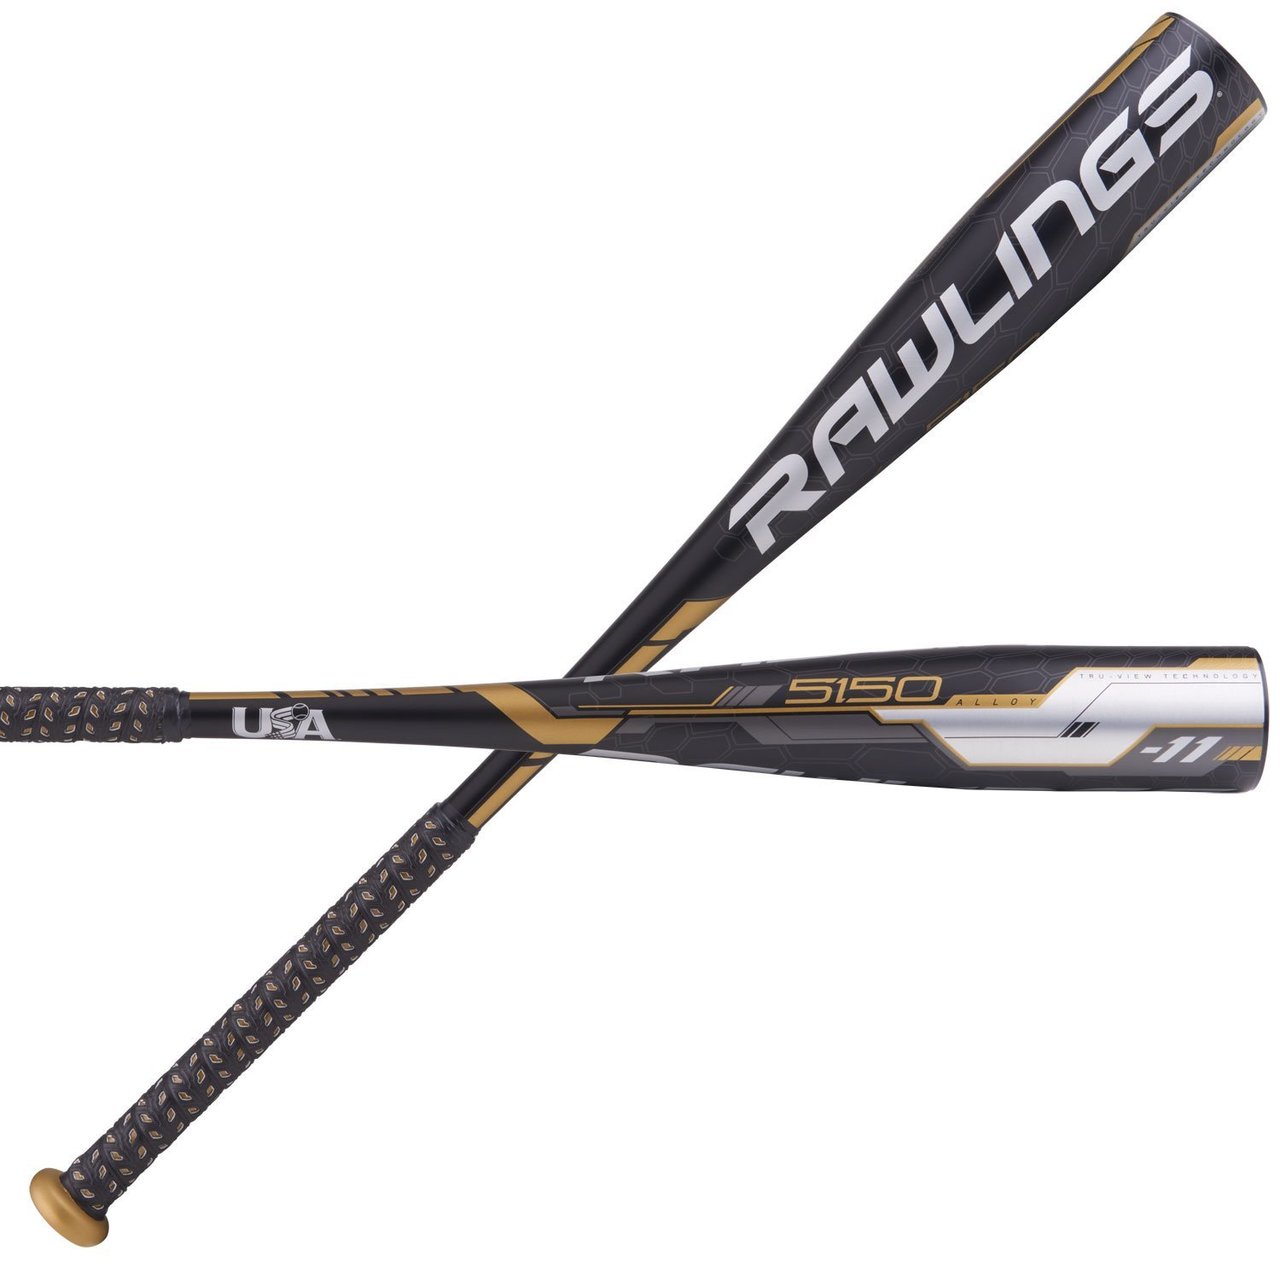 High-performance metal Baseball bat delivers exceptional pop and balance Engineered with p0p 2.0 technology for an expanded sweet spot Balanced design delivers a smooth feel and maximizes bat speed Constructed with Aircraft-grade 5150 alloy to enhance responsiveness Usa-stamped bat is approved for new 2018 standards in all USA Baseball leagues